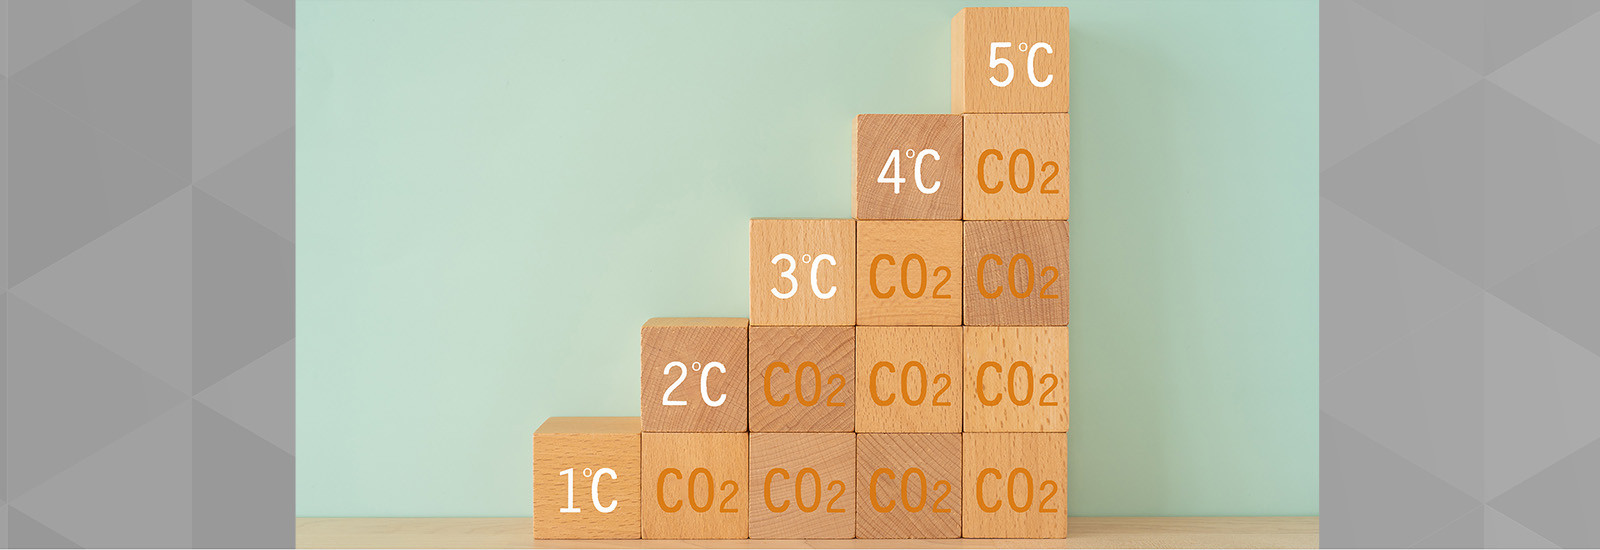 Stacked building blocks showing carbon dioxide adding up to temperature increases. 